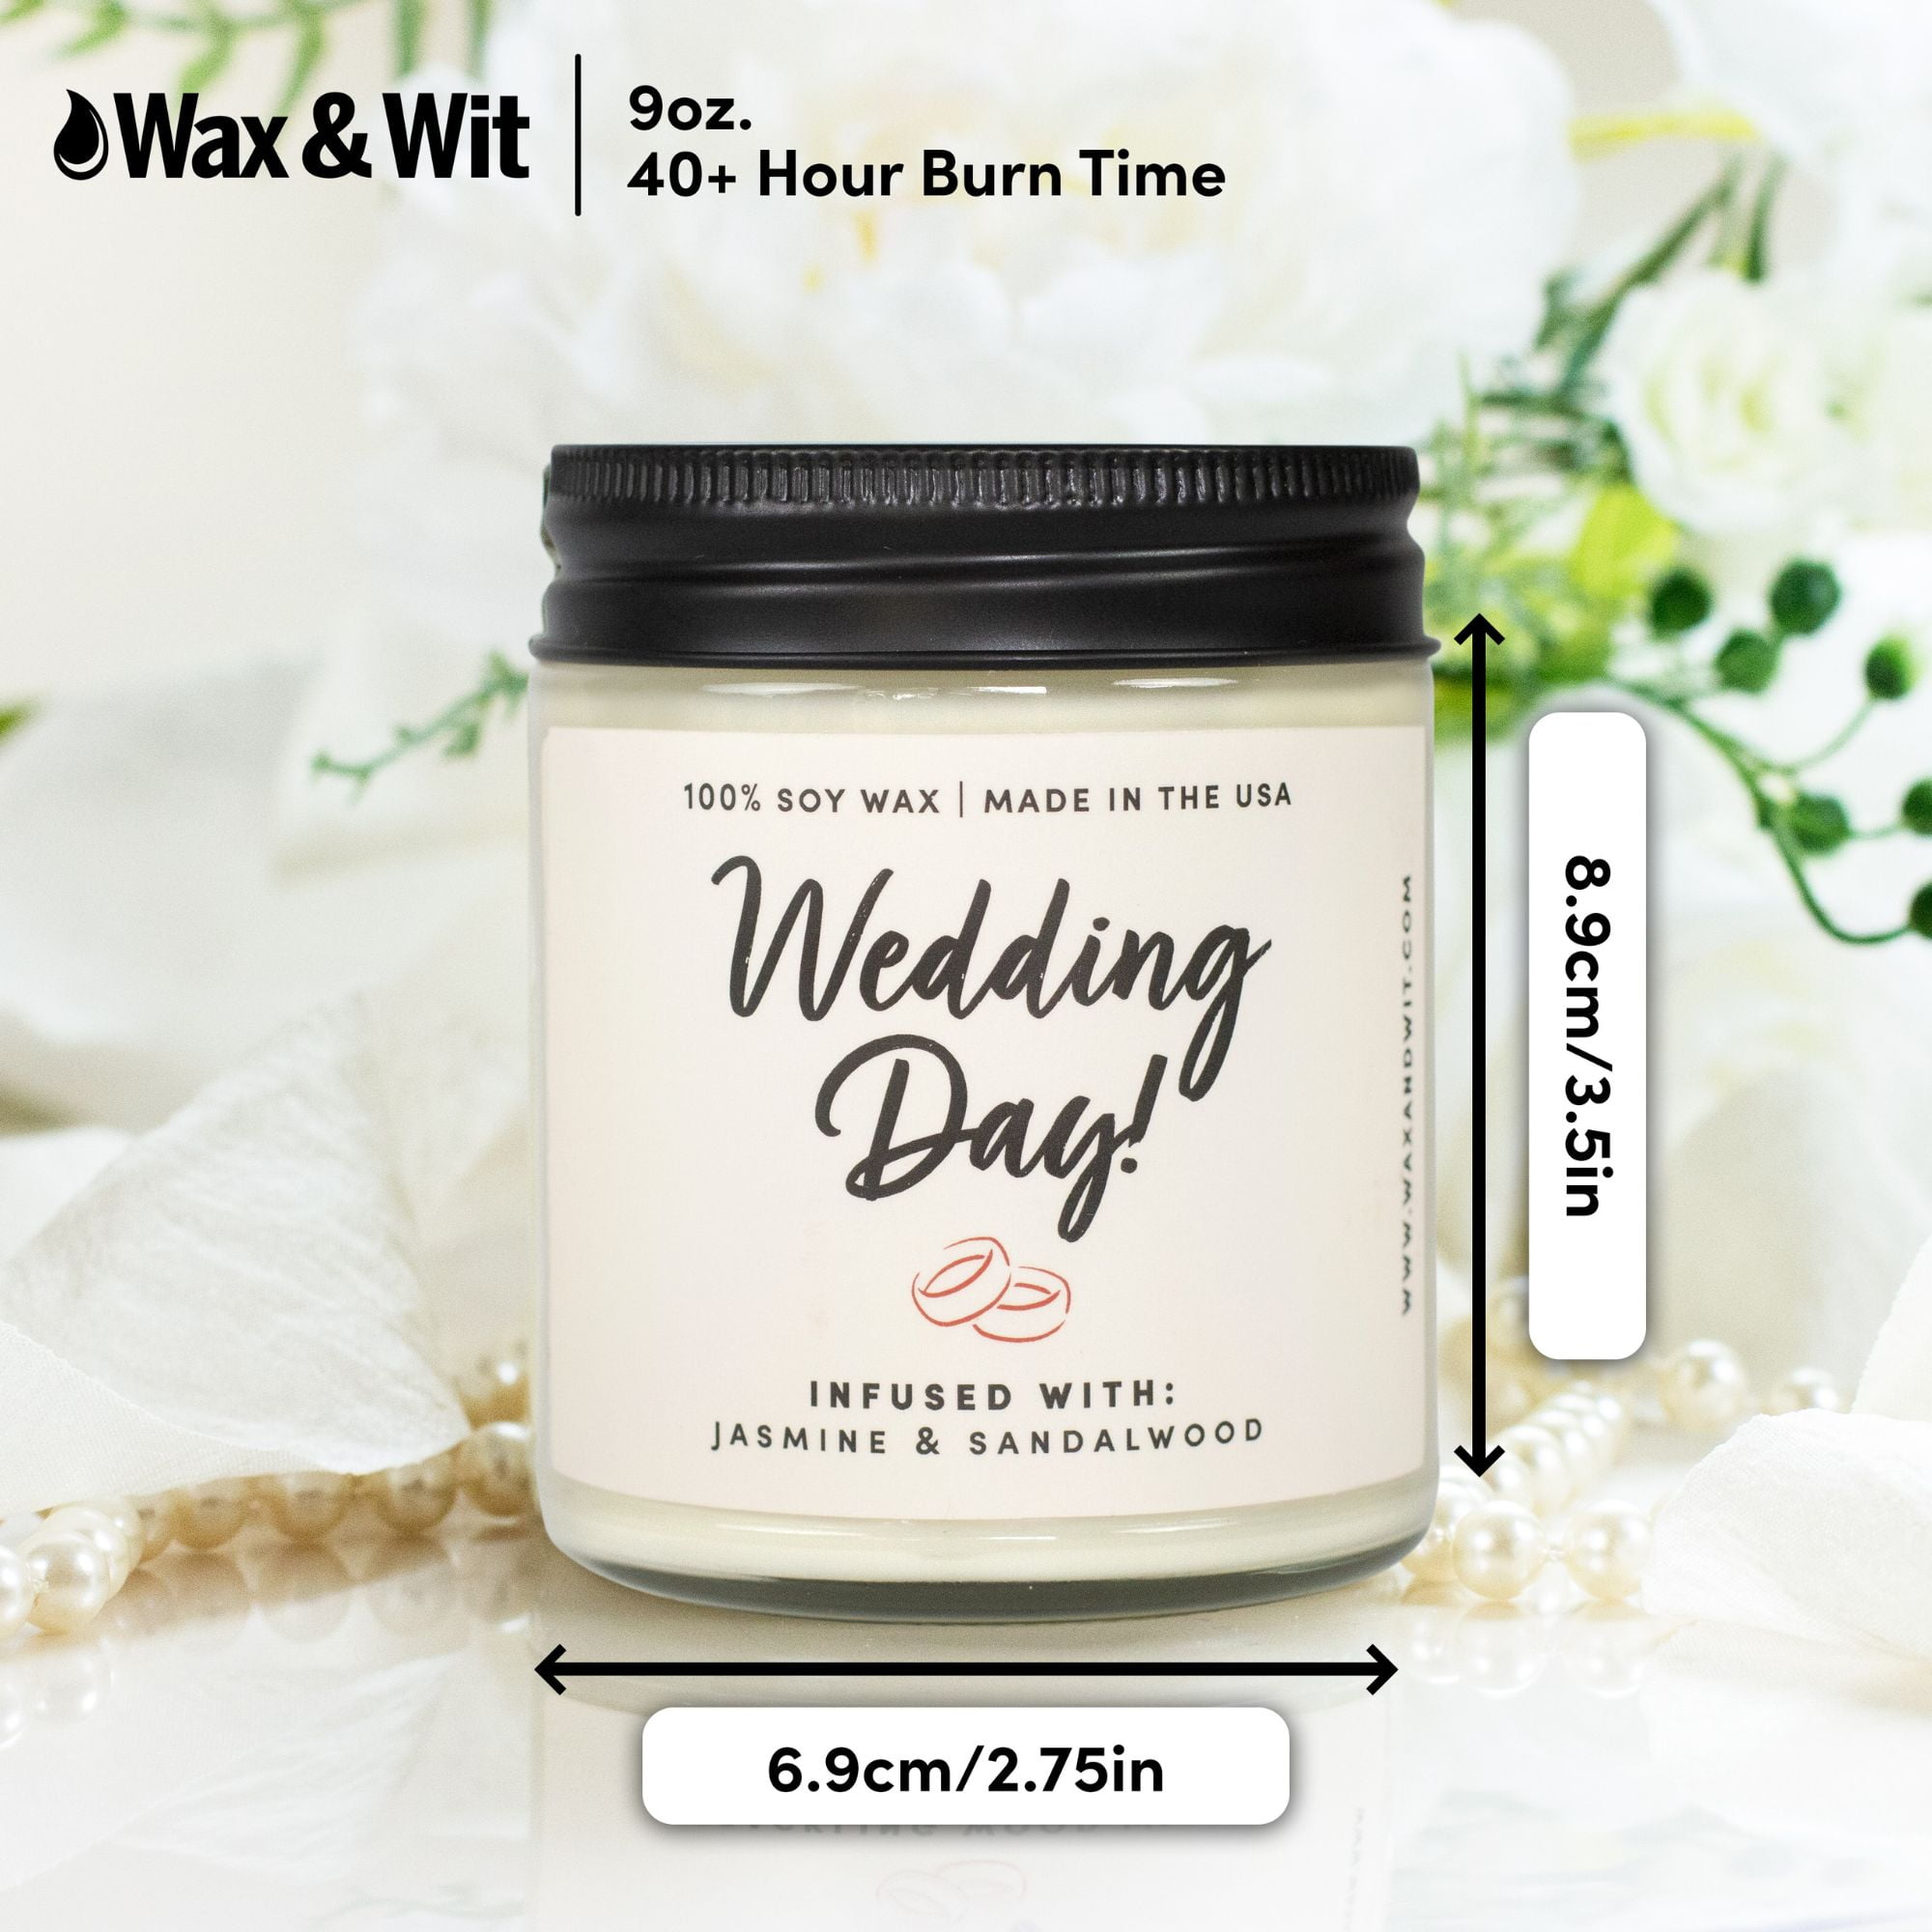 Engagement Gifts for Couples Women Newly Engaged Gifts Unique Mr and Mrs Wedding Engaged AF Soy Wax Candle Gifts for Her Ring Finger Coffee Mug